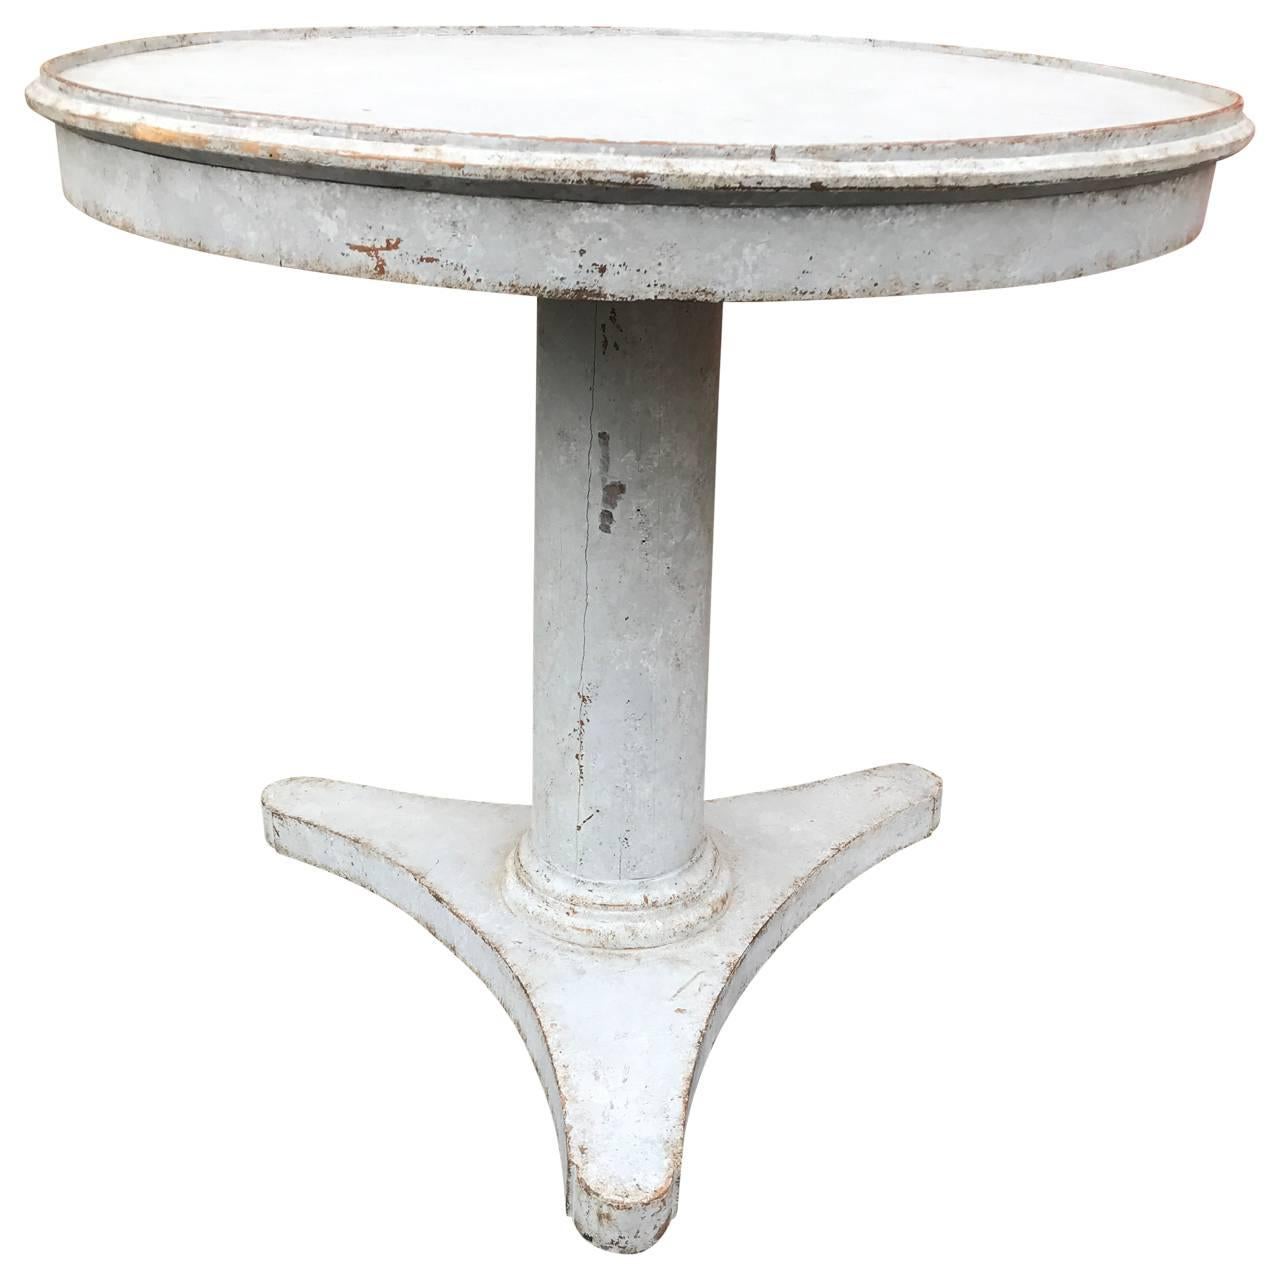 Period Swedish painted pedestal table with profiled top.